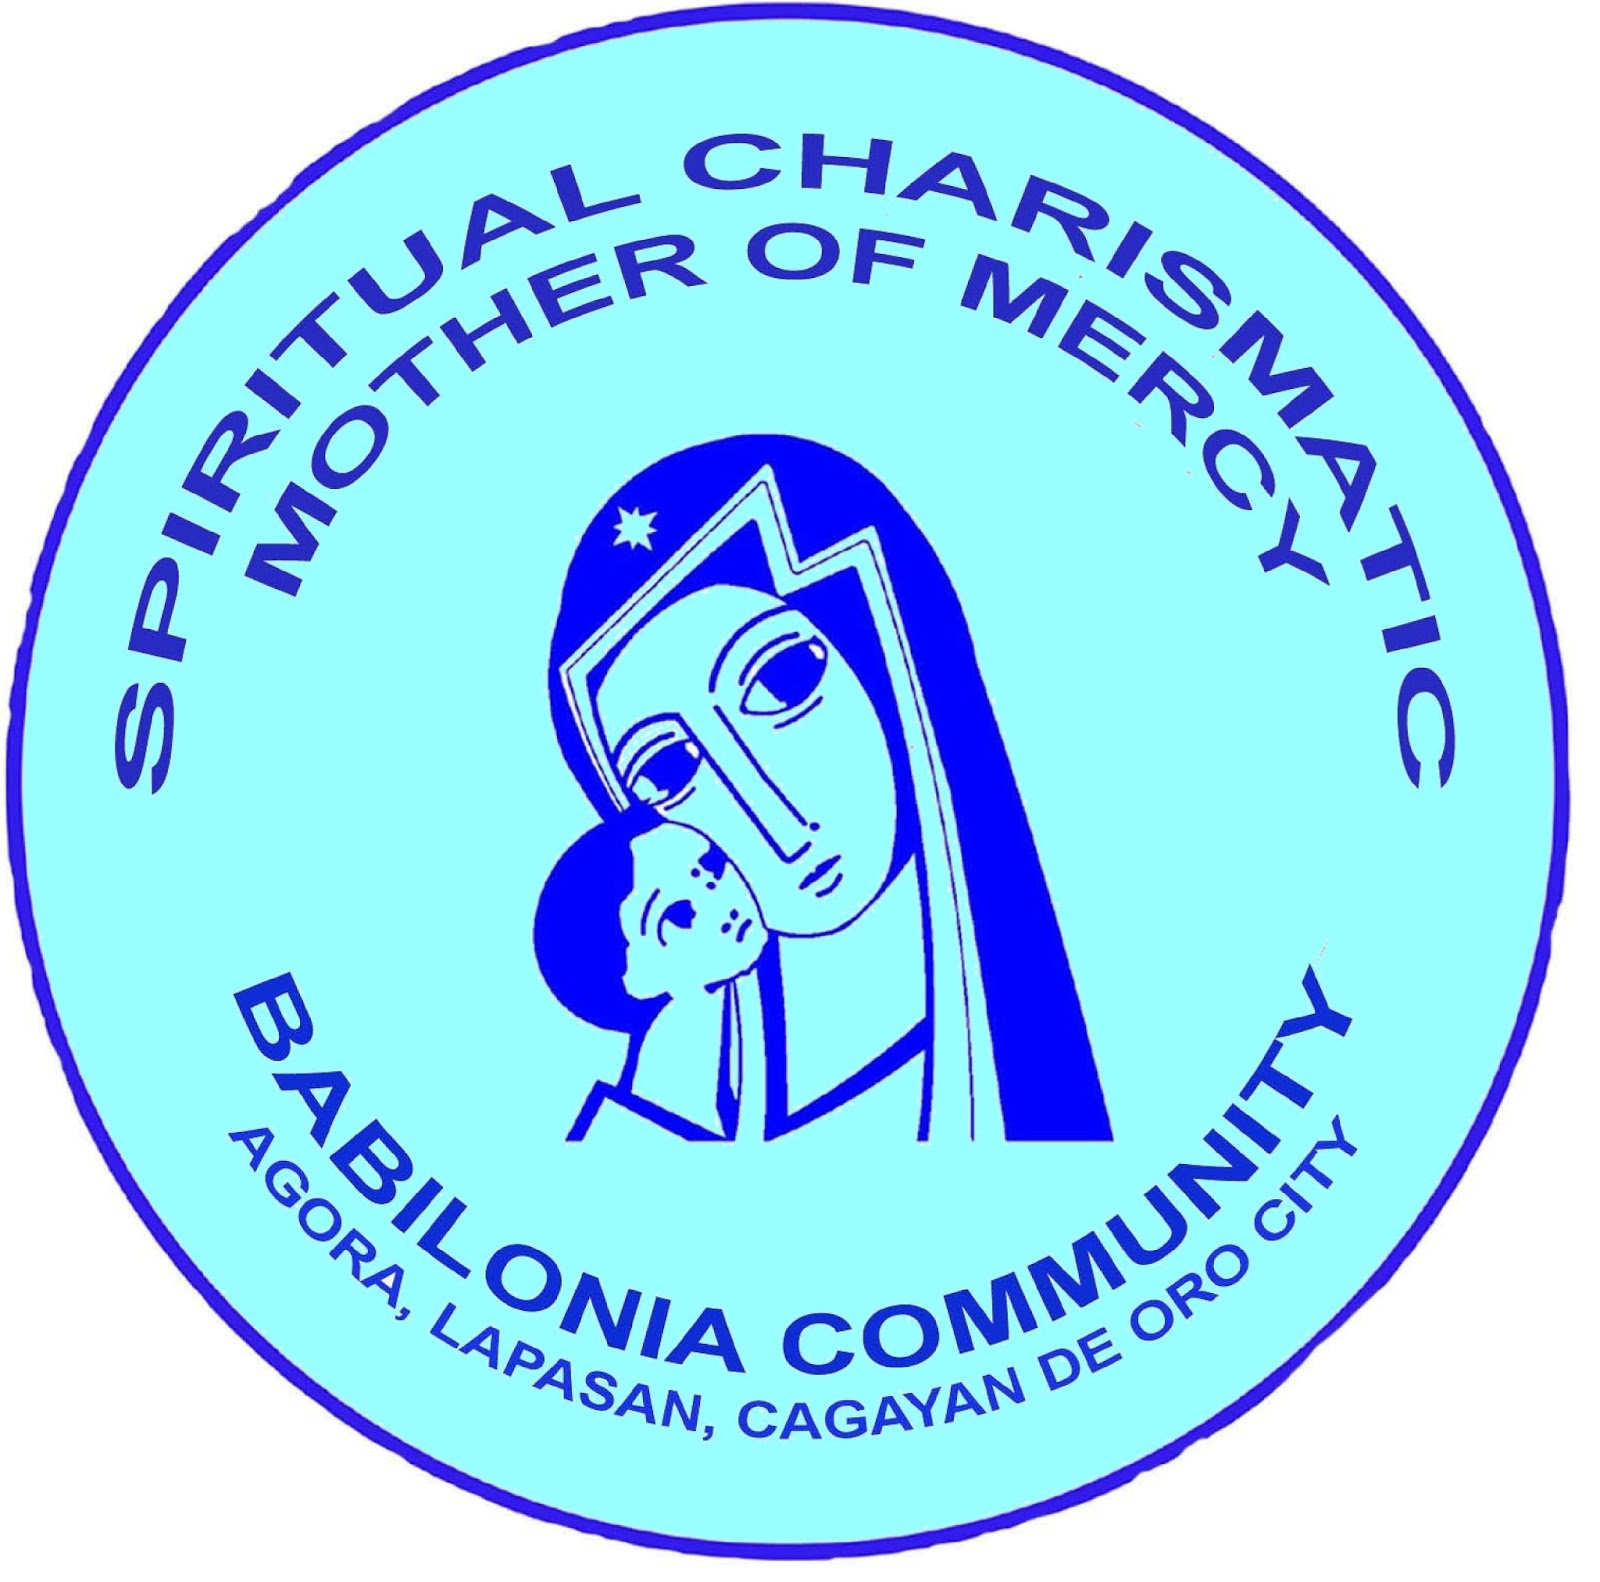 SPIRITUAL CHARISMATIC MOTHER OF MERCY